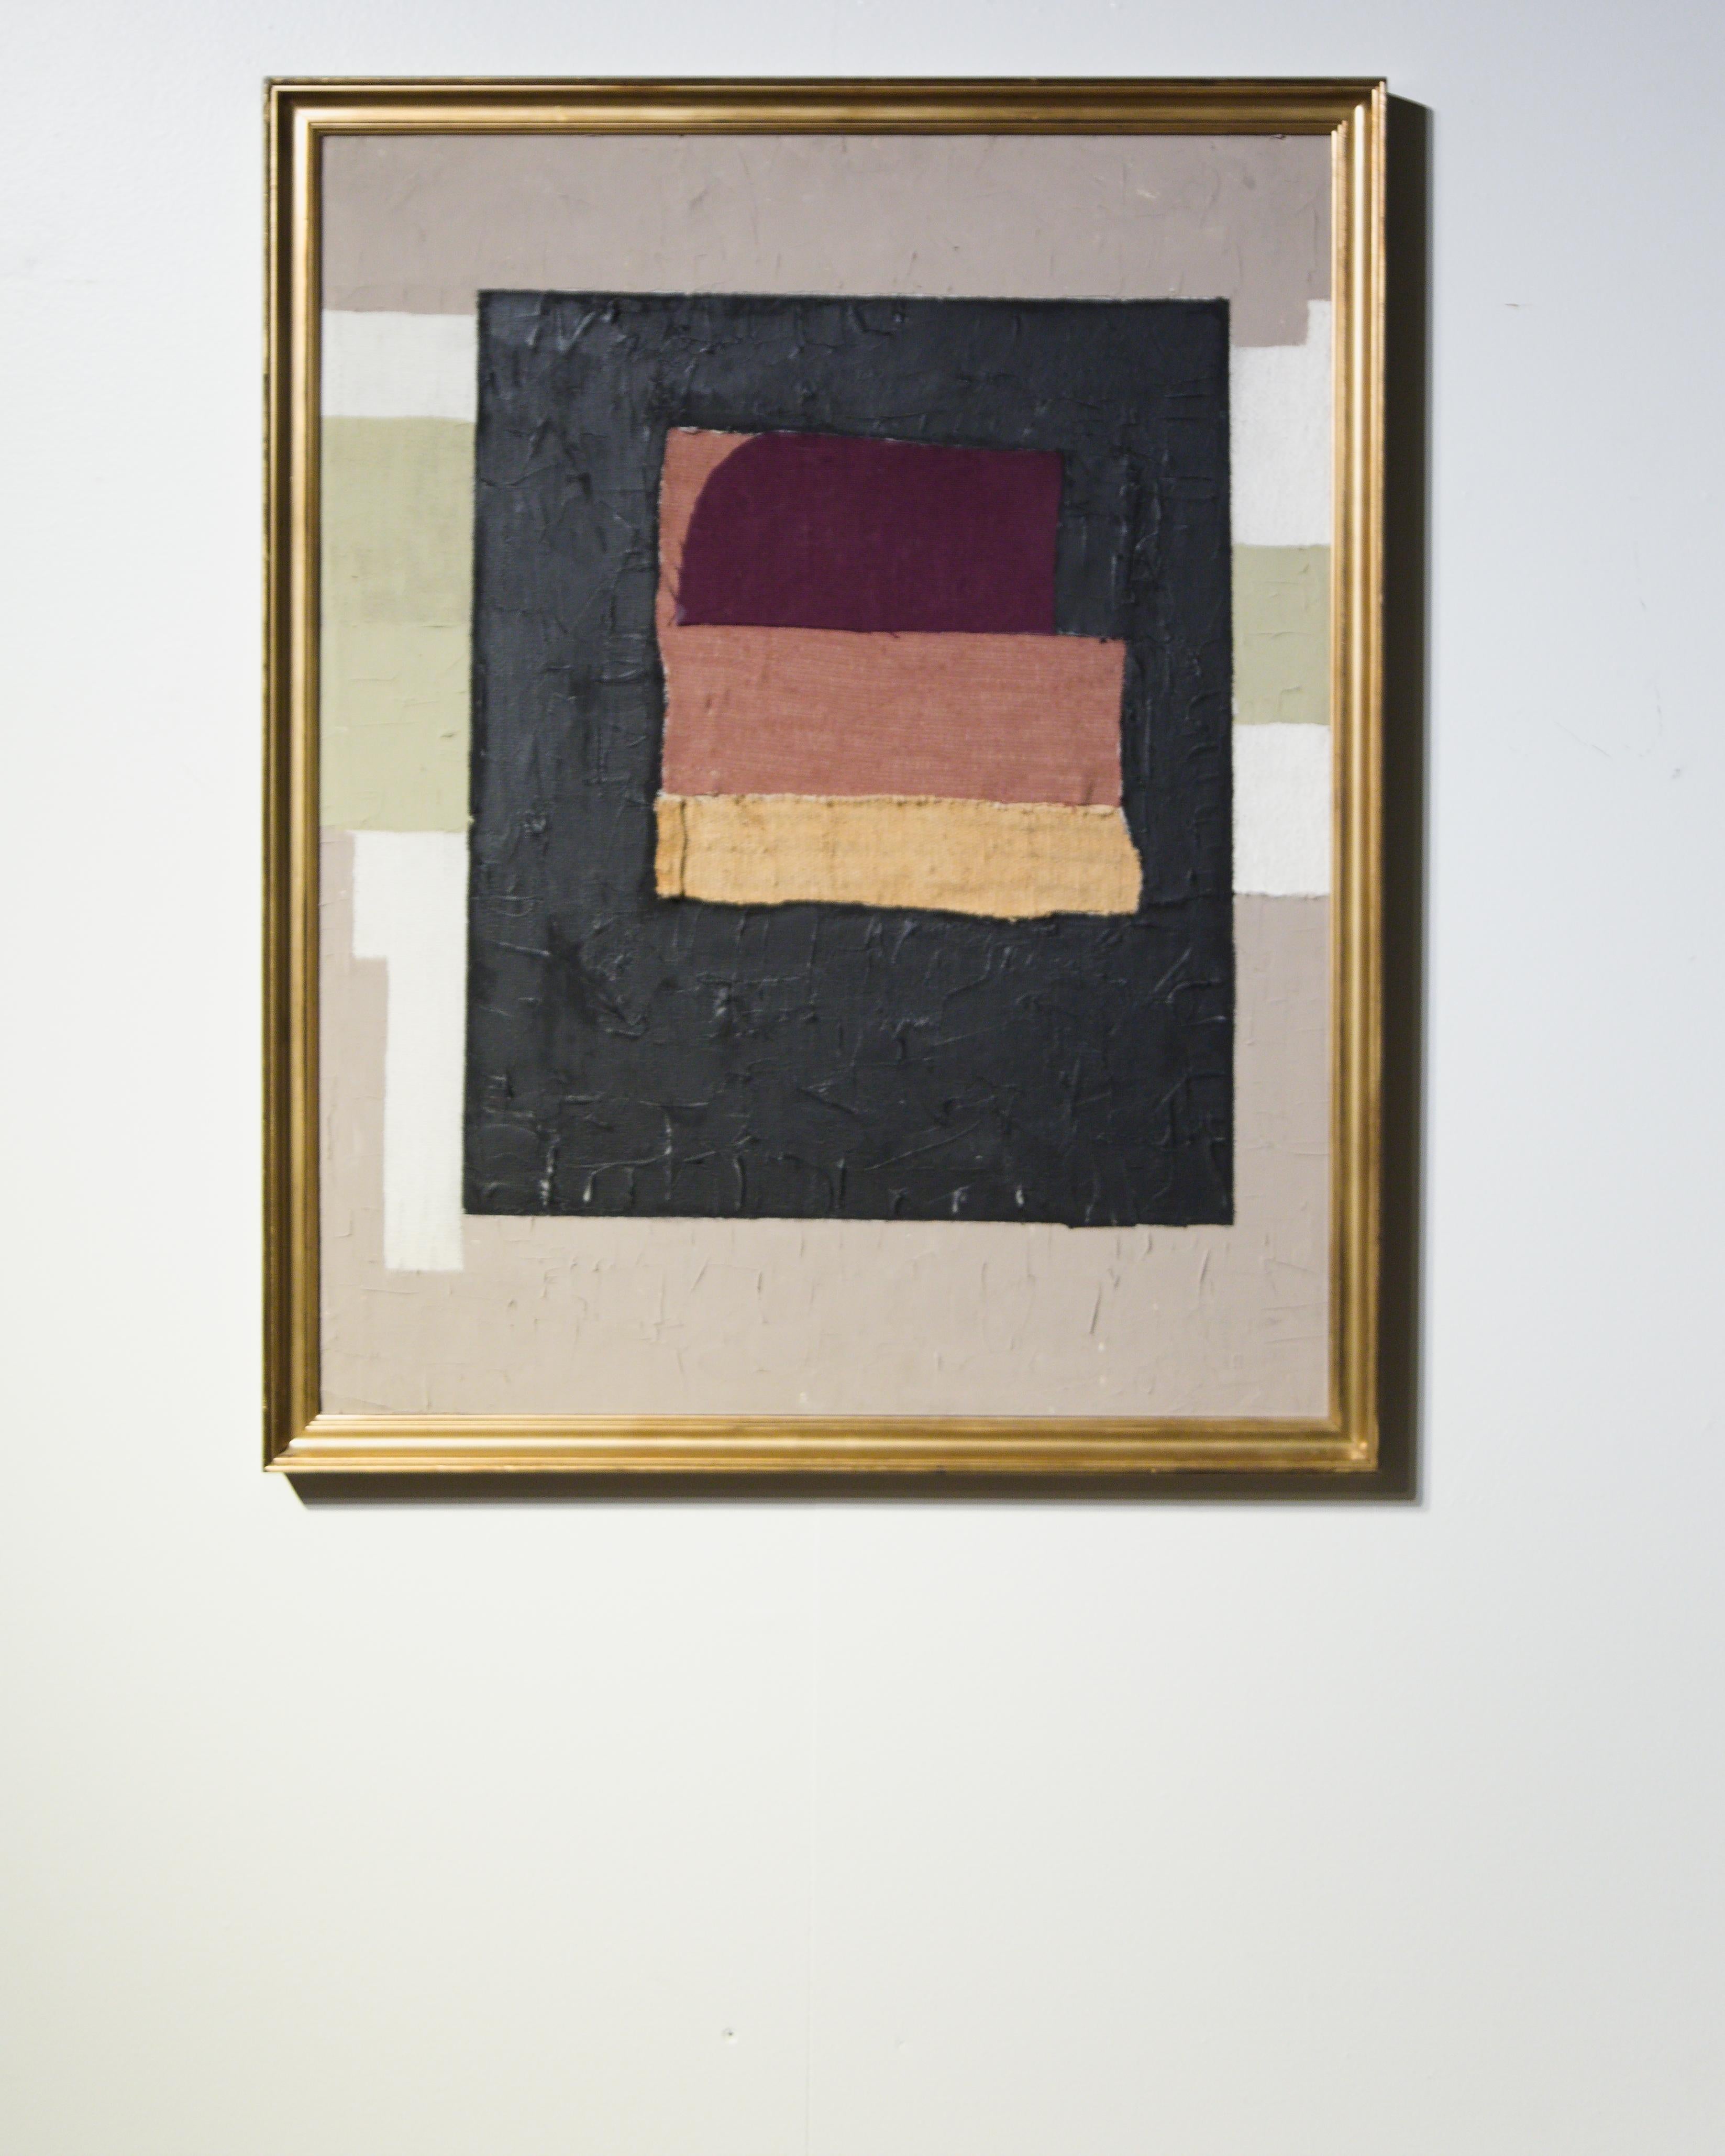 A framed textile collage by artist Raoul Morren, made in 2023. The harmonious composition is created with a palette of warm neutrals, enlivened by rust orange and ochre fabrics and a splash of deep burgundy. Designed to be displayed with any